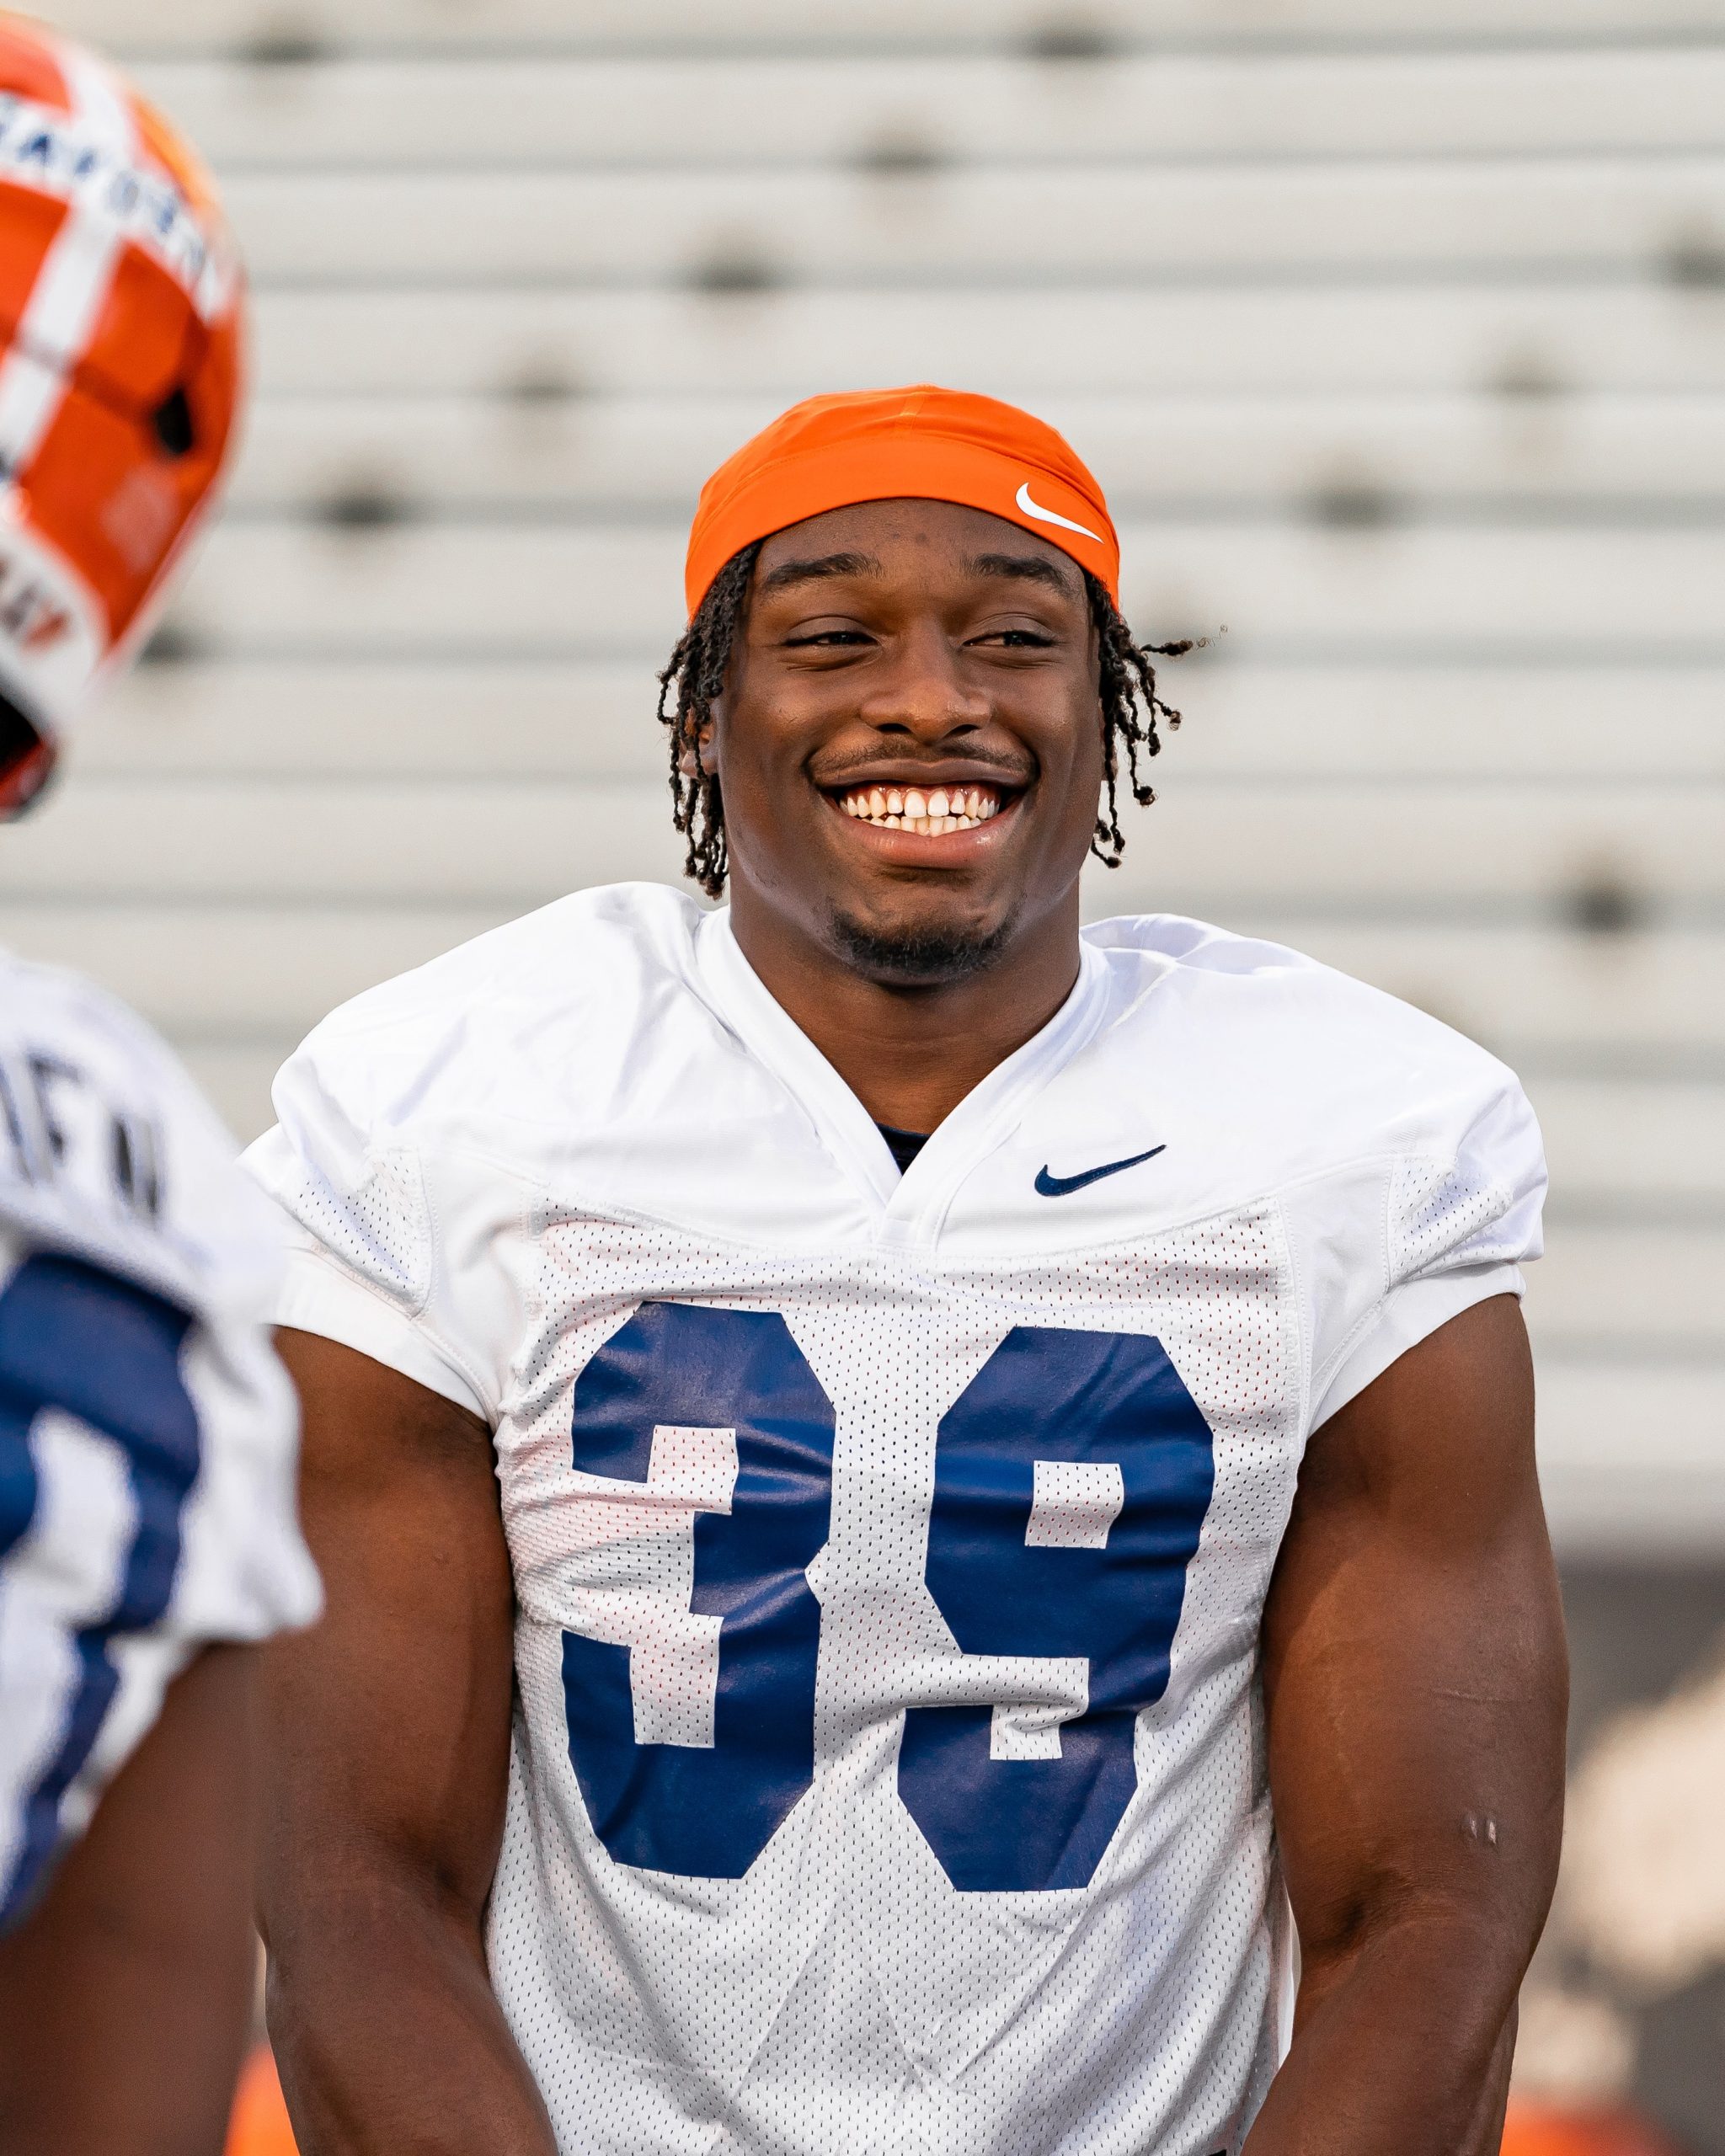 ‘Give me a thousand Kenenna’s’: Illini’s Odelunga Proving To Be Weapon At Multiple Positions